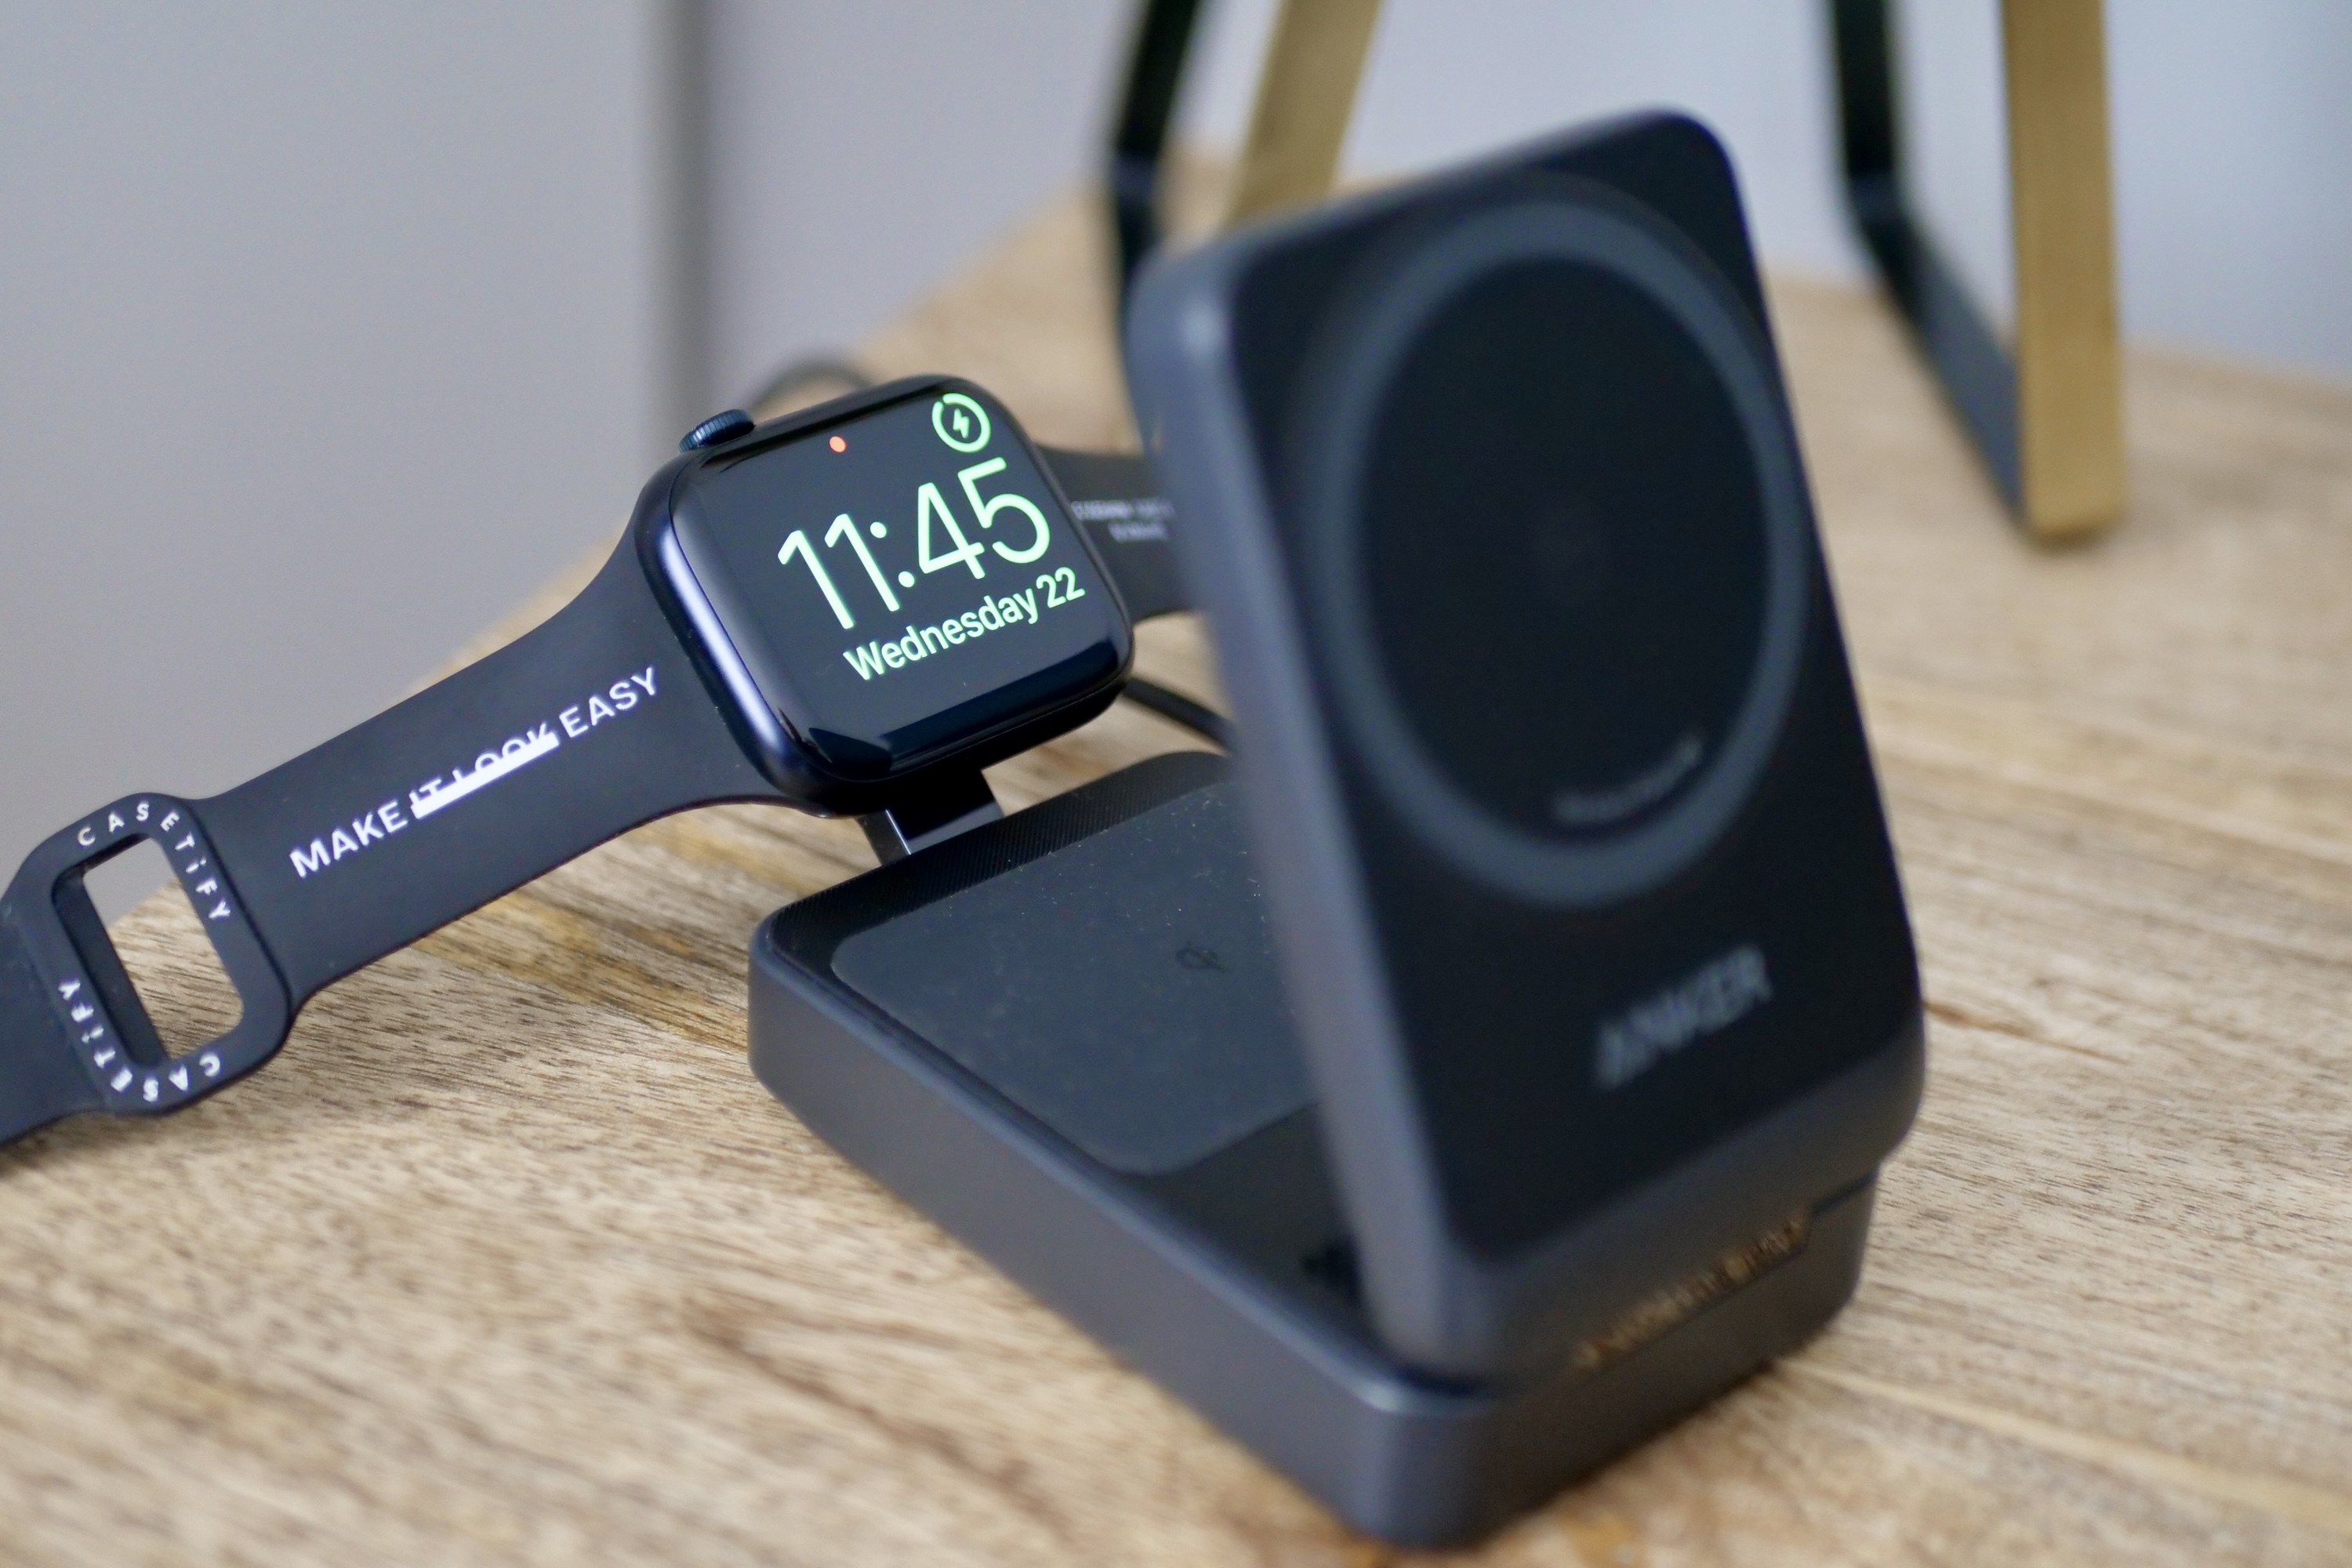 The Apple Watch charging on the Anker MagGo Wireless Charging Station.